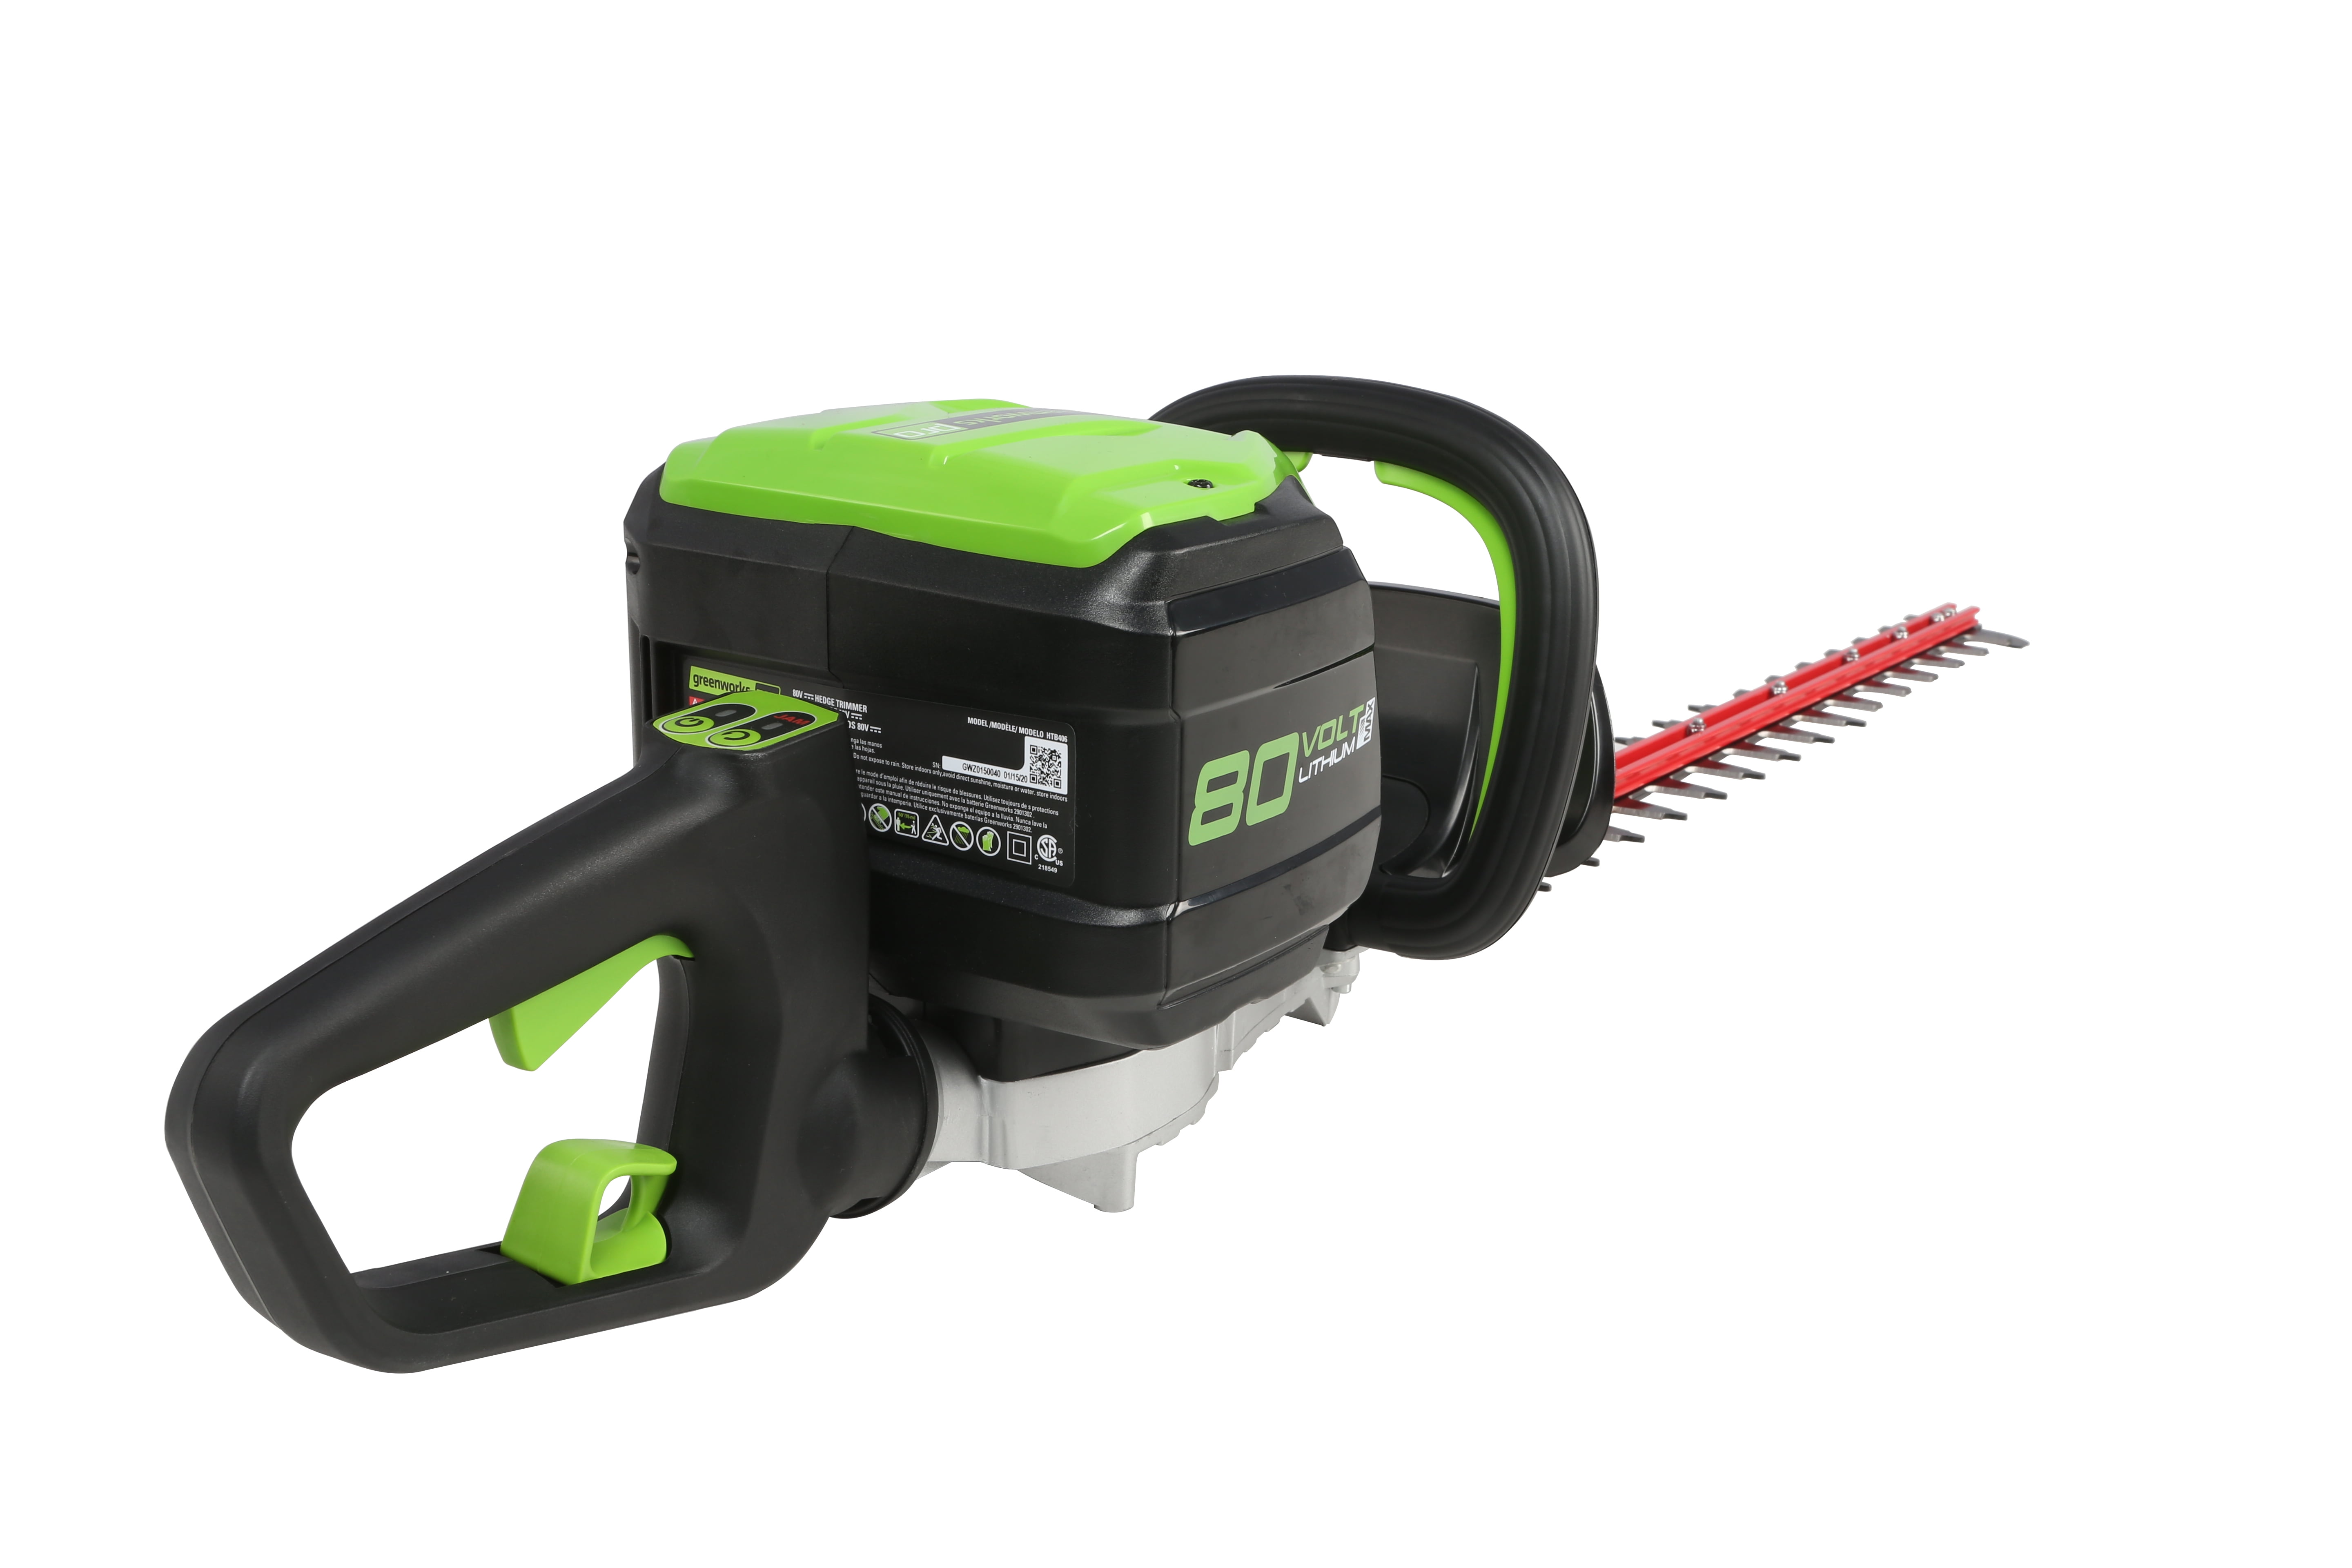 Discontinued - Greenworks PRO 80V 26-inch Cordless Brushless Hedge